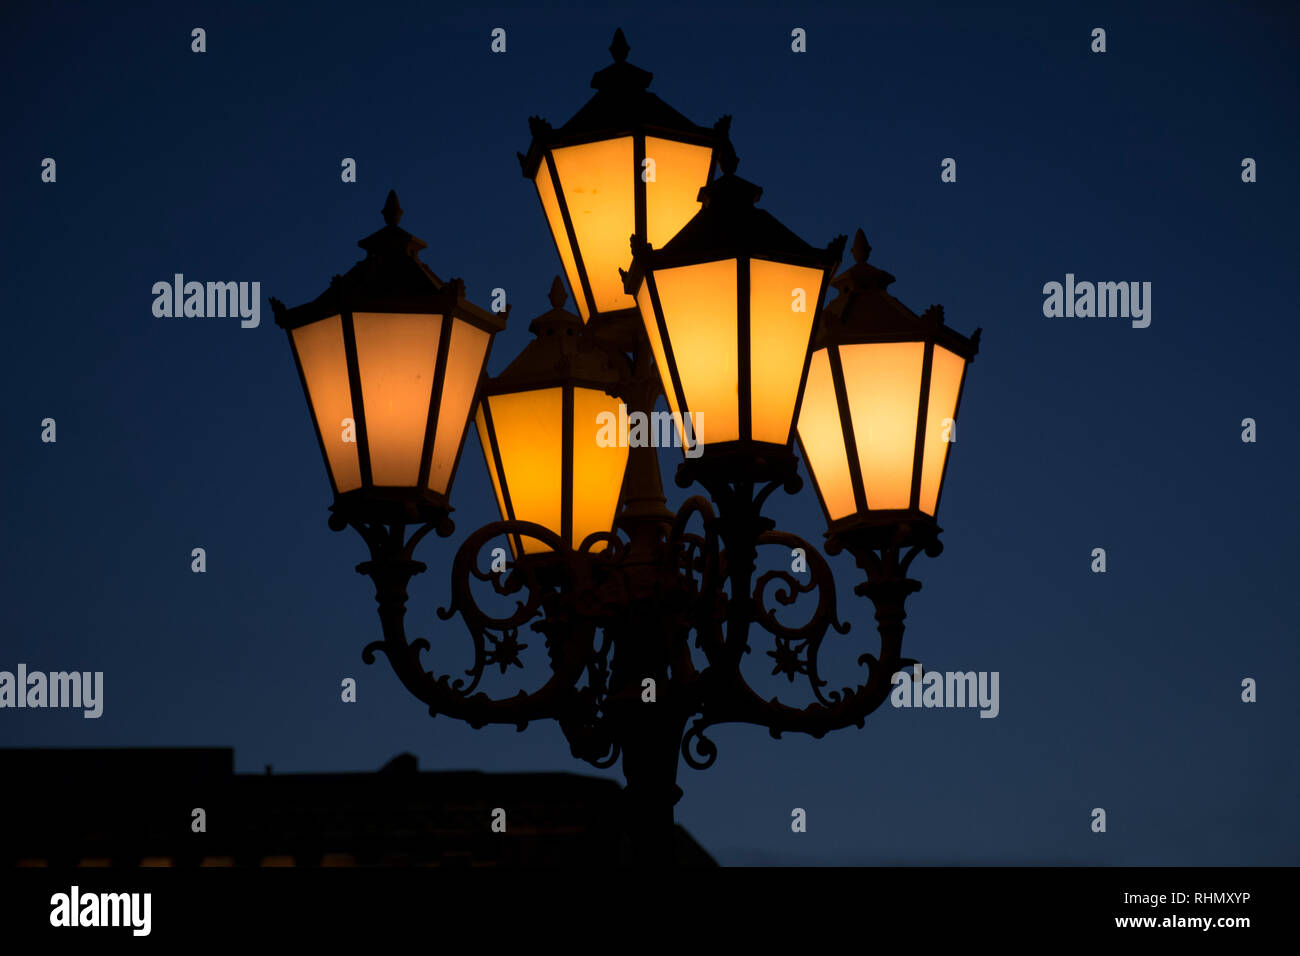 A street lamp at sunset, silhouette of lamp. Street lamp at night. A brightly lit street lamps at sunset. Decorative lamps. Armenia Stock Photo